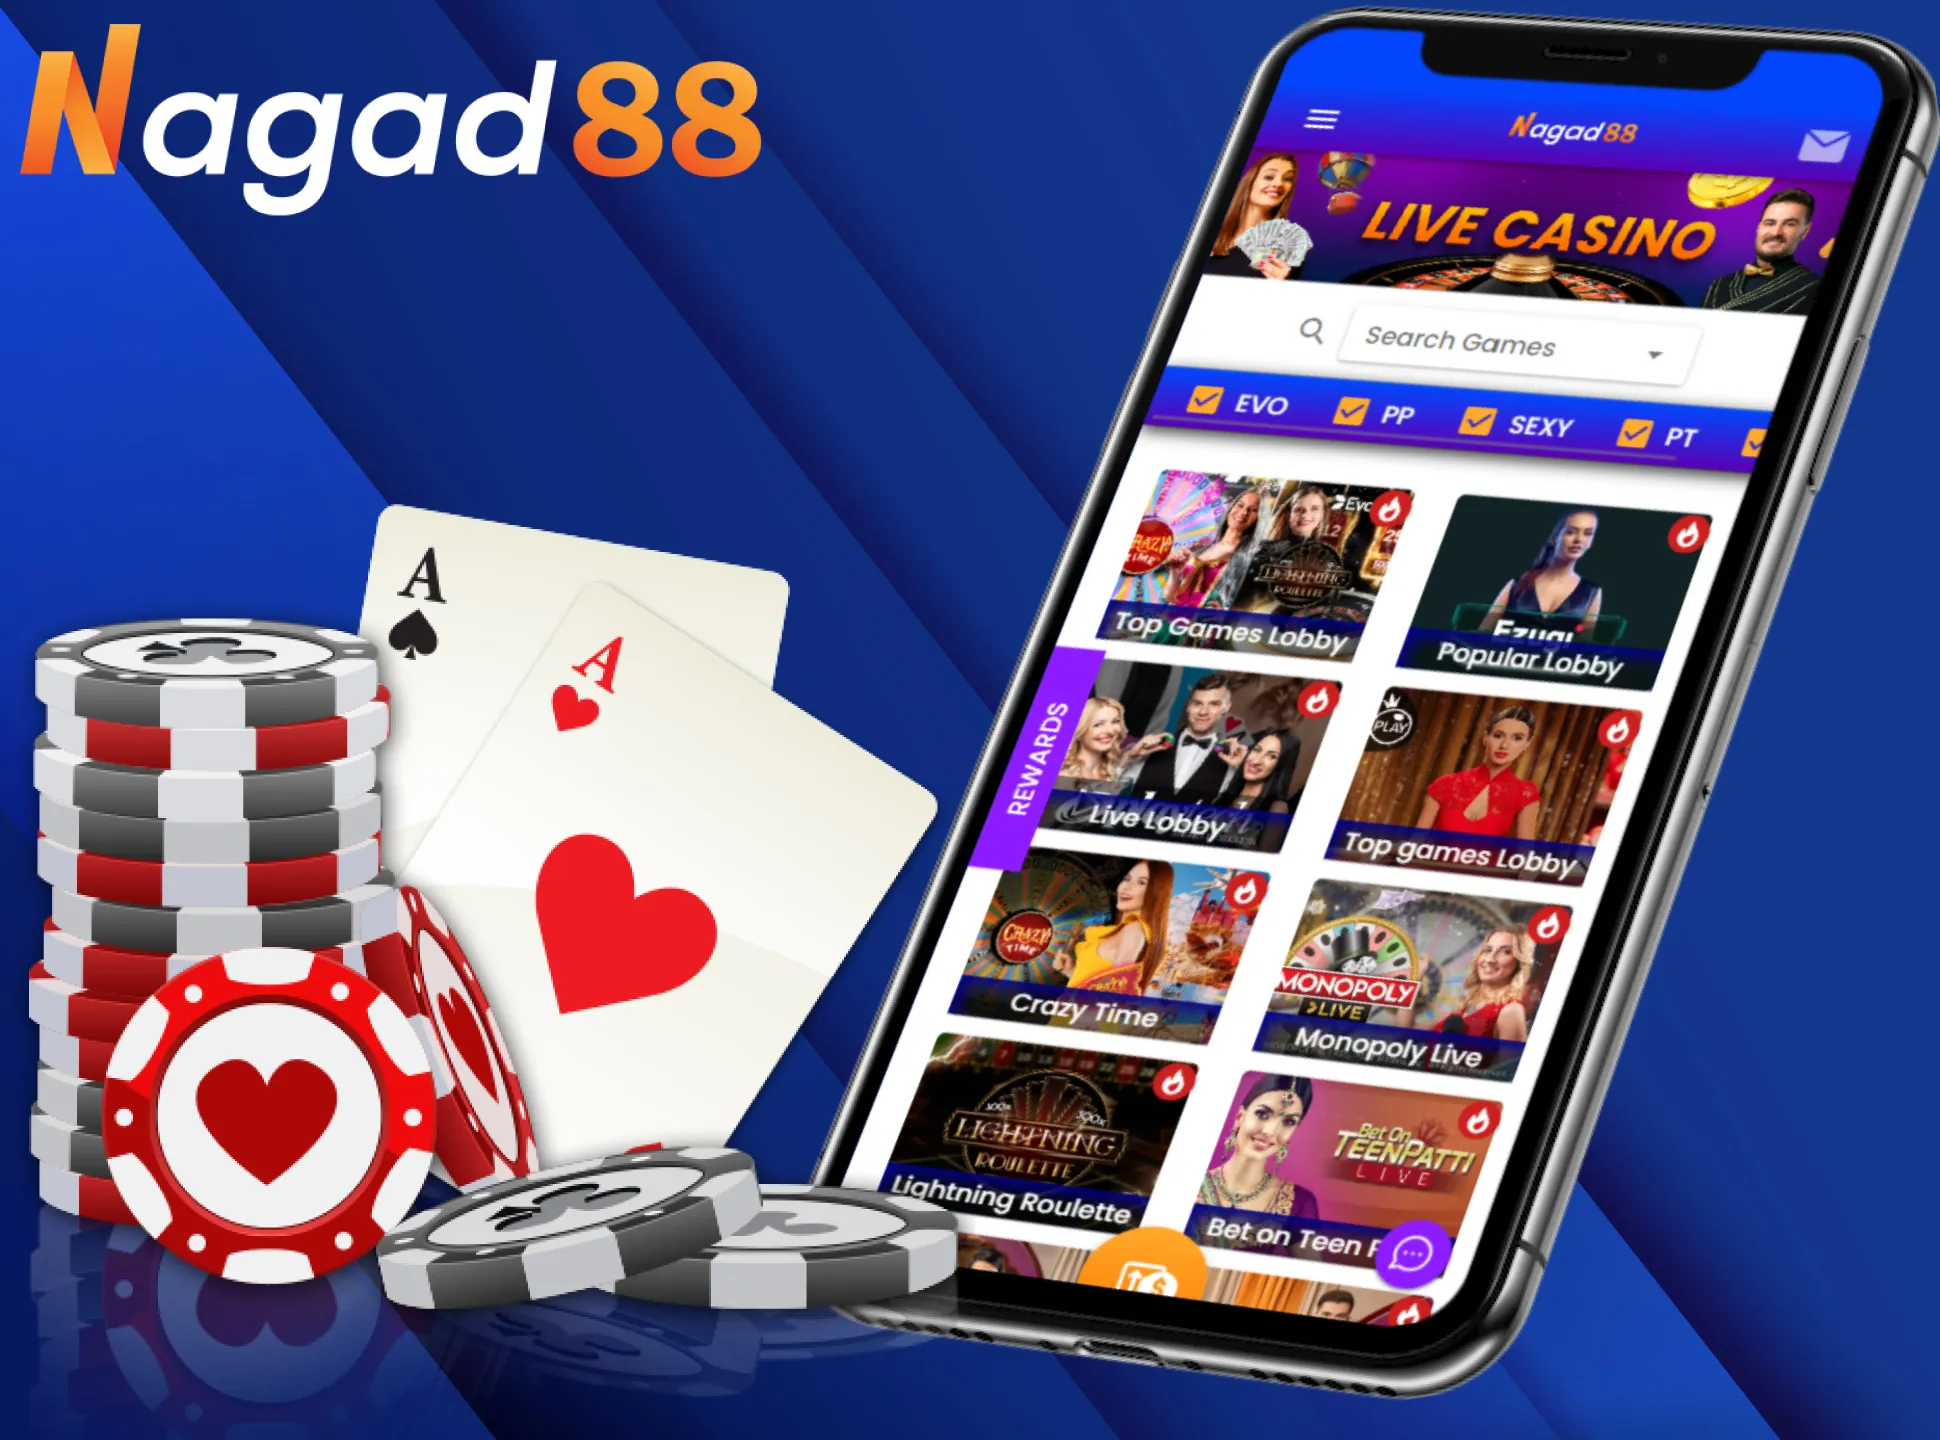 Play all the favorite casino games in the Nagad88 mobile casino.